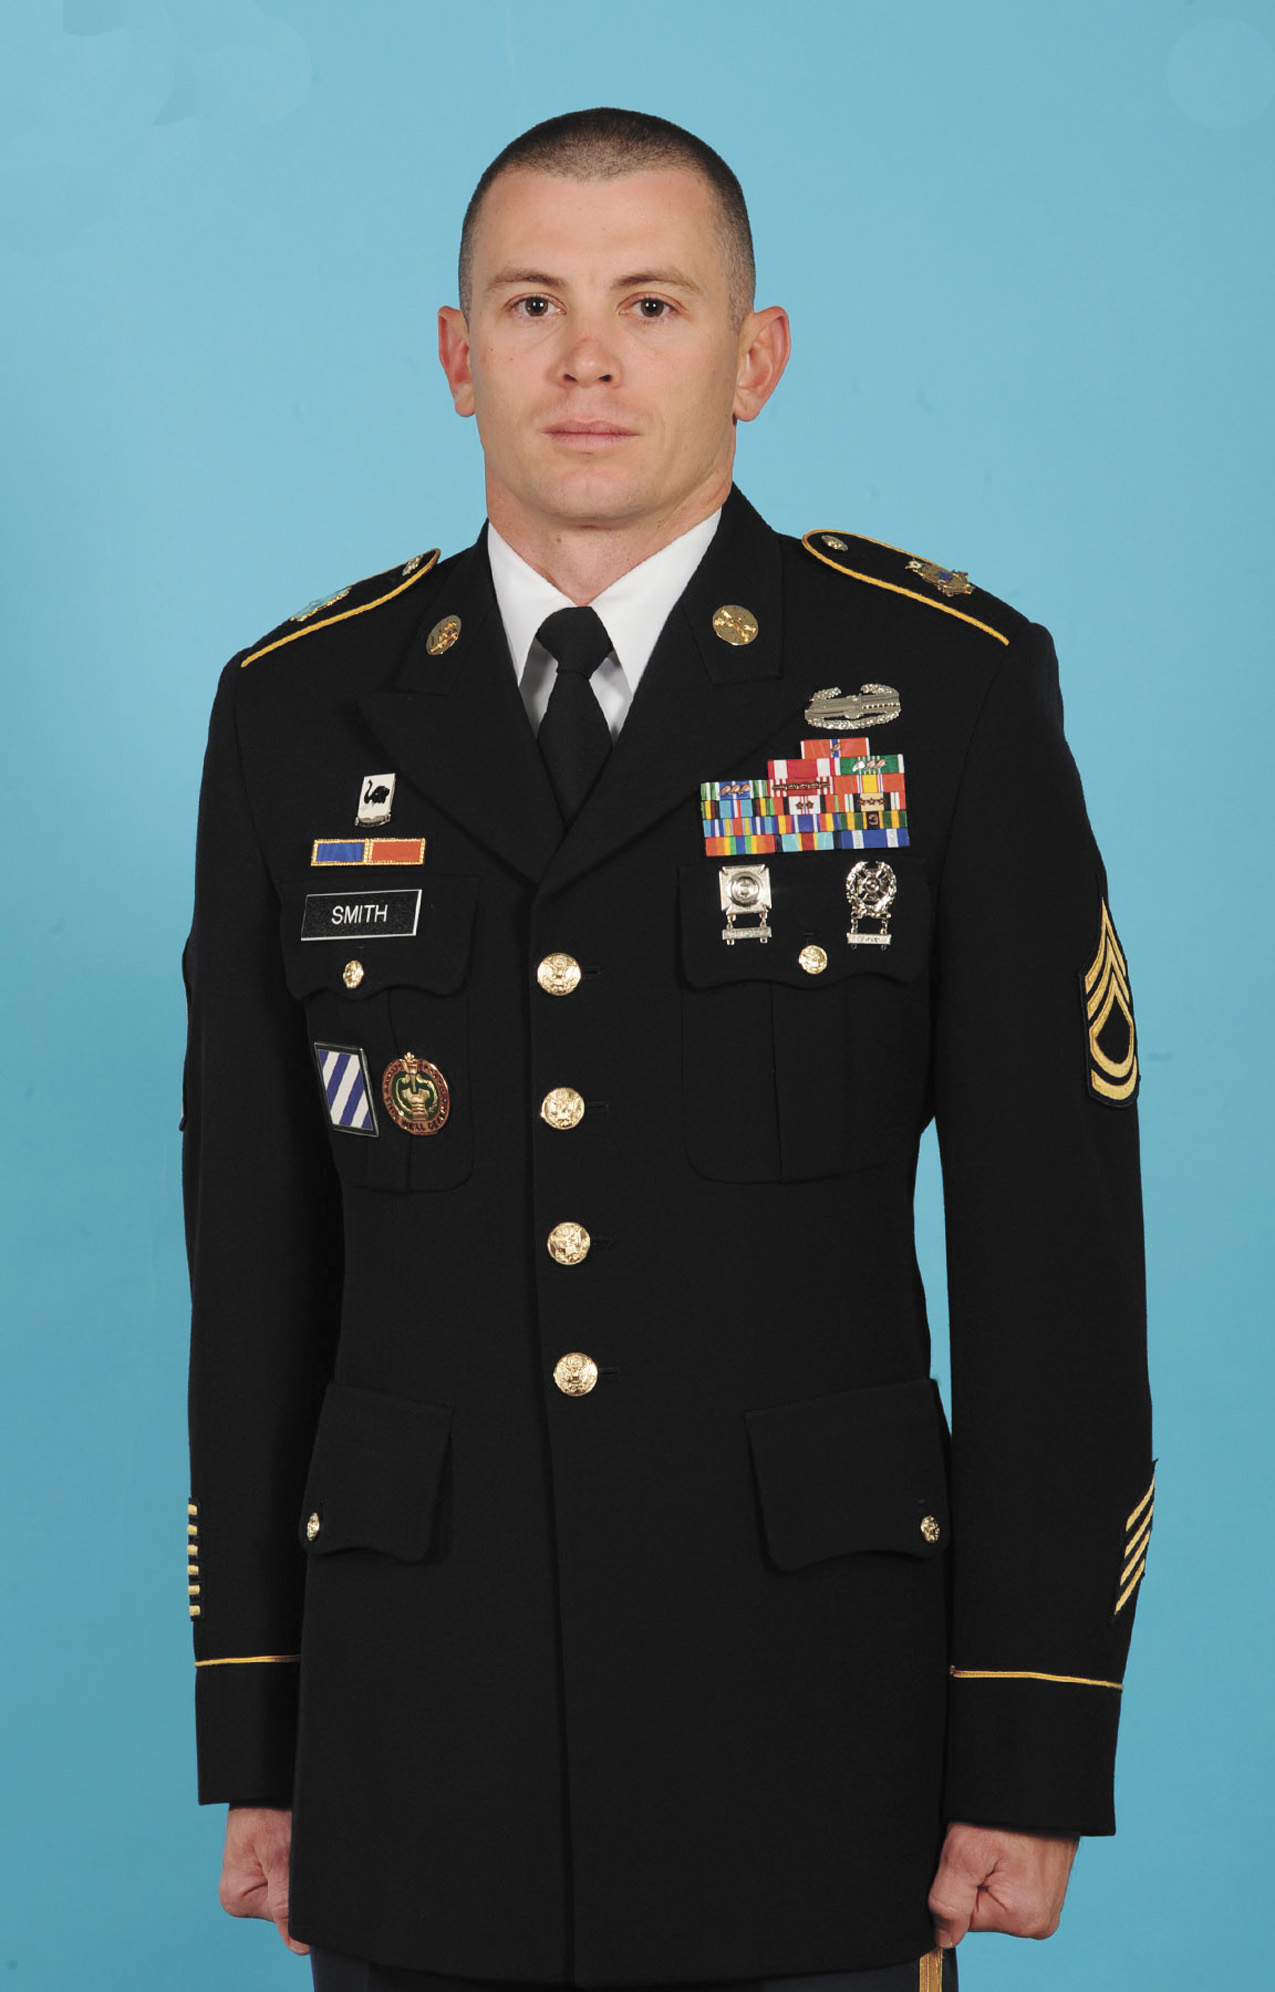 Dillon Native Inducted Into Sergeant Audie Murphy Club – The Dillon Herald